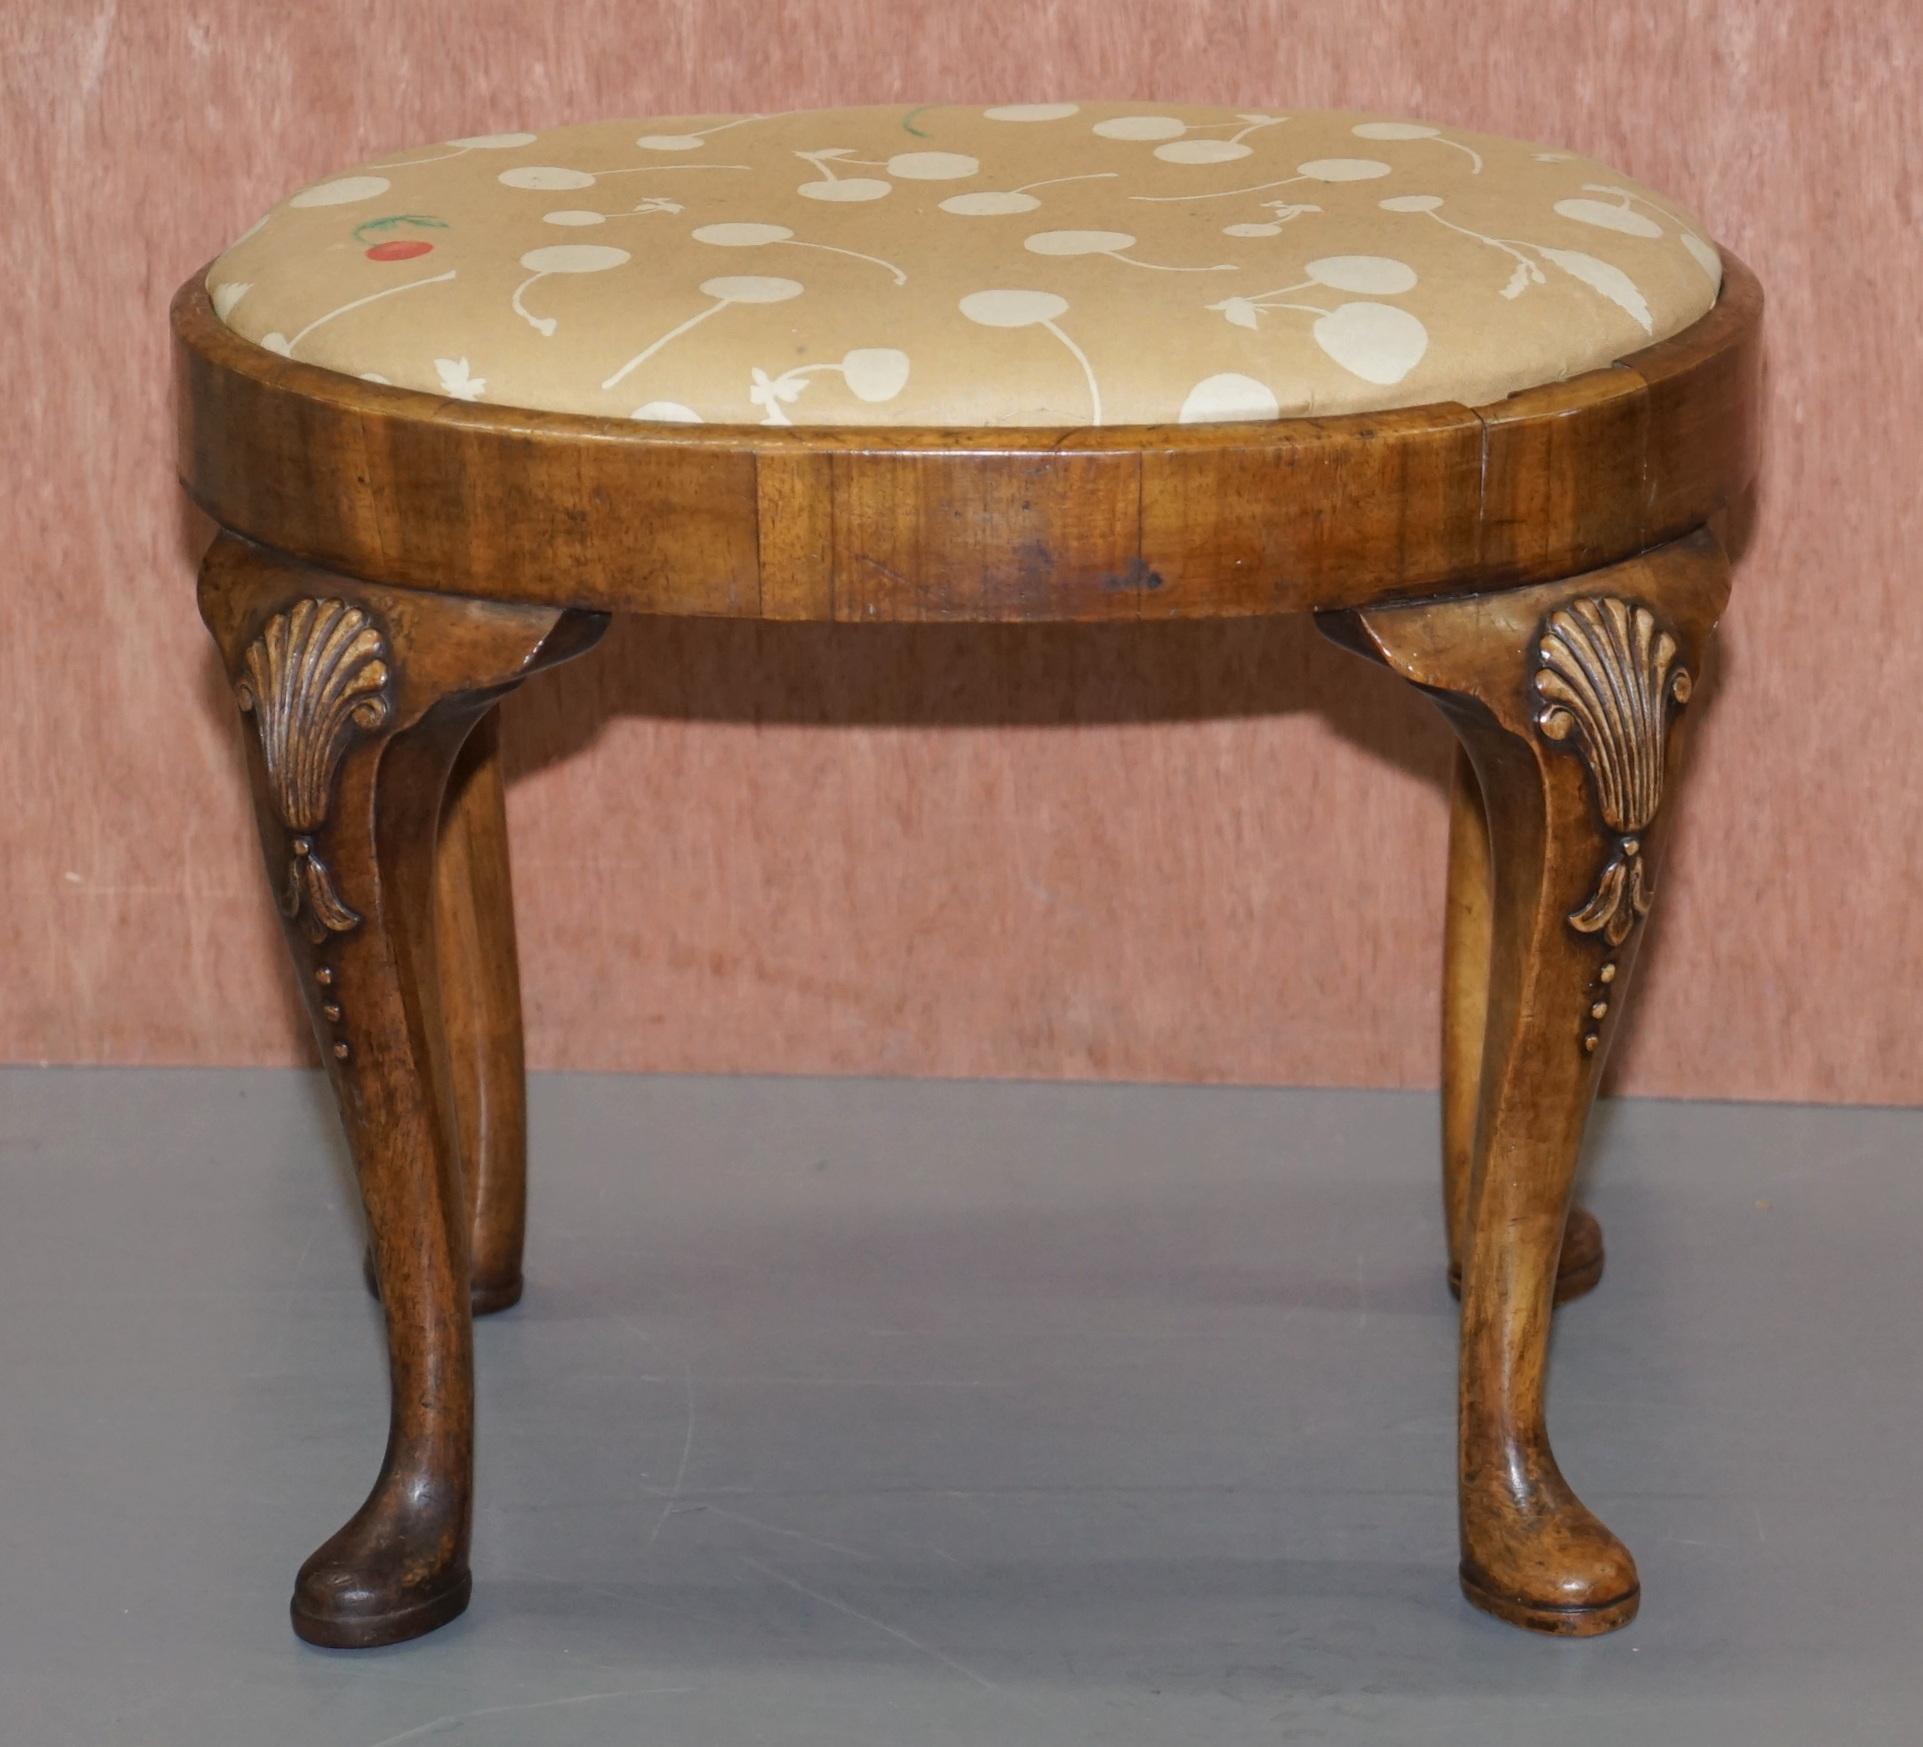 We are delighted to offer for sale this stunning Georgian Iris walnut stool with cherry berry upholstery

A very good looking well made and decorative stool, ideally suited for a dressing table, piano or bay window

The stool is made up of light